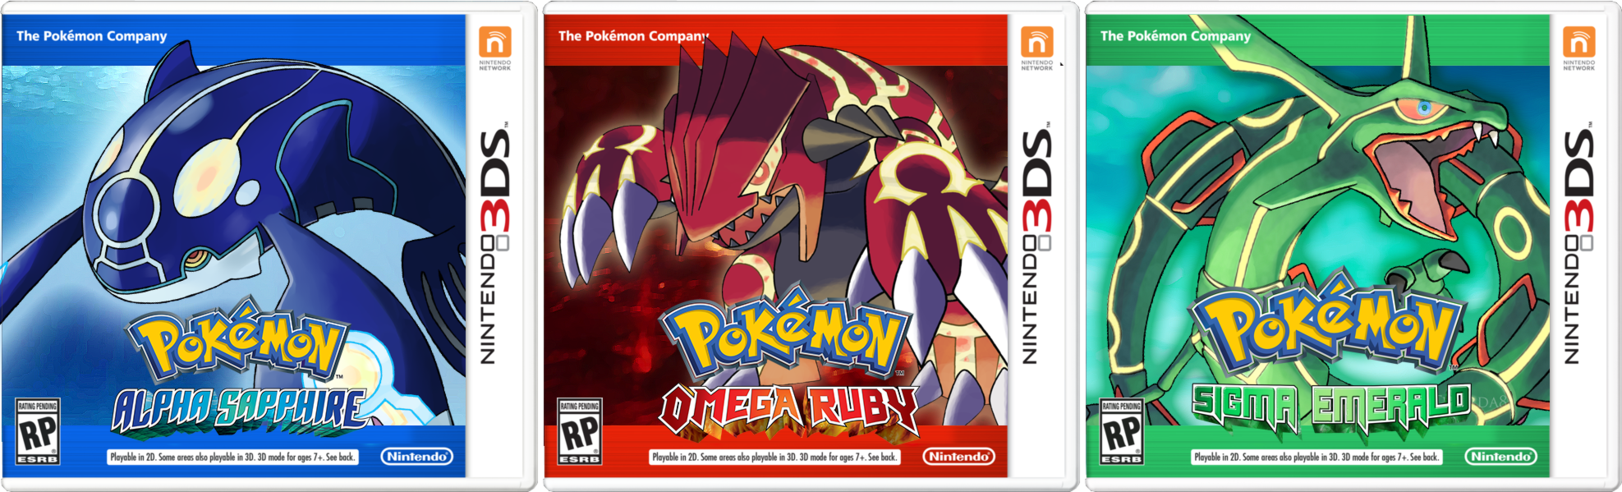 Nice wallpapers Pokémon Omega Ruby And Alpha Sapphire 1622x492px